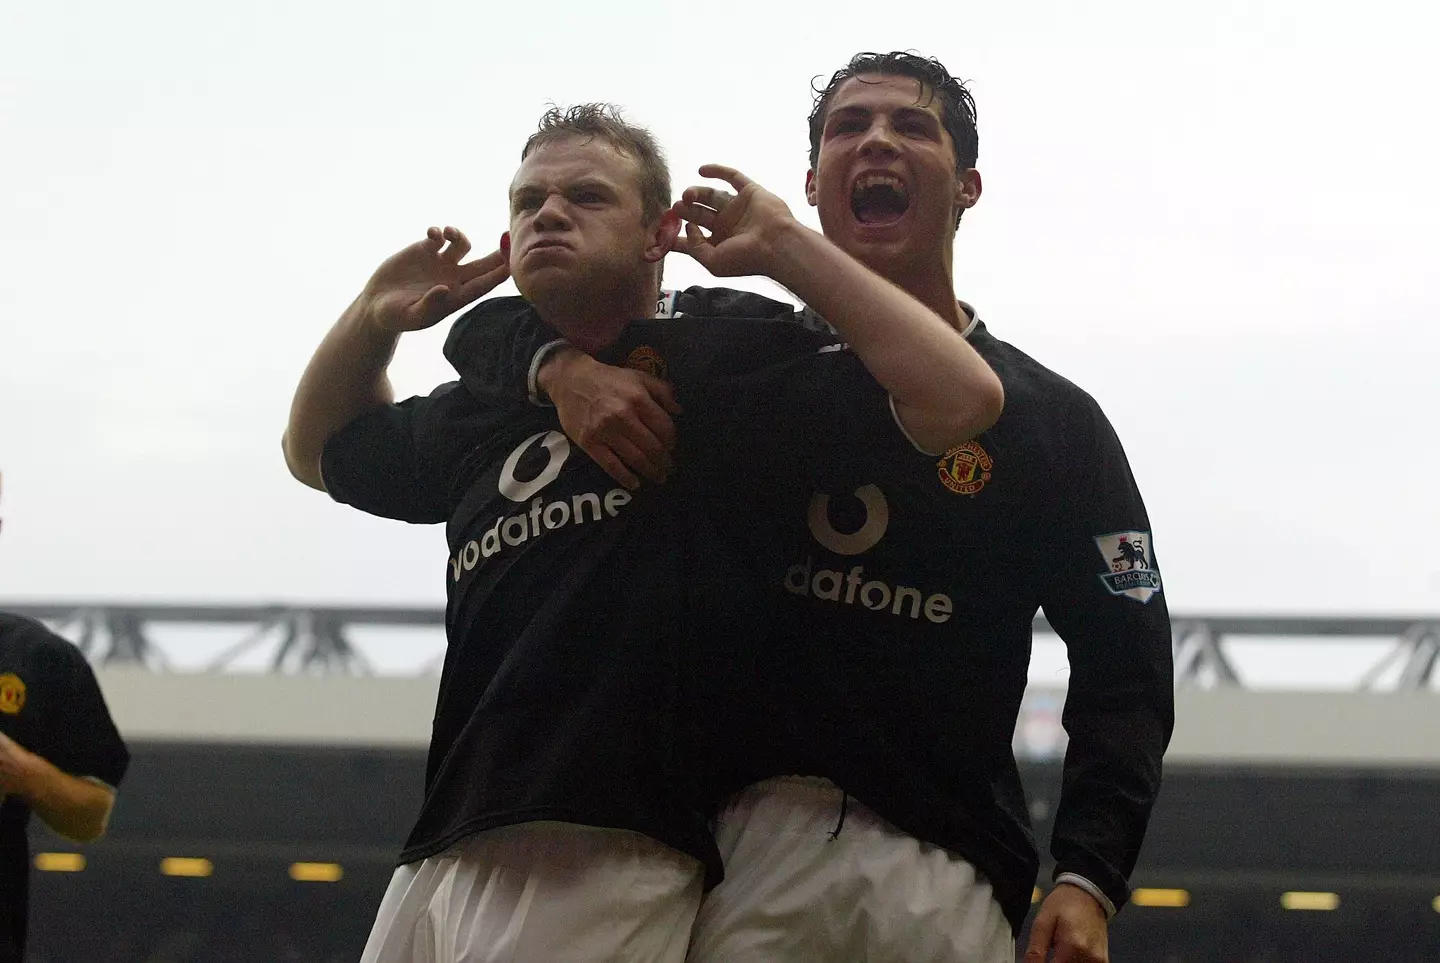 Rooney and Ronaldo during their time together at United. (Image